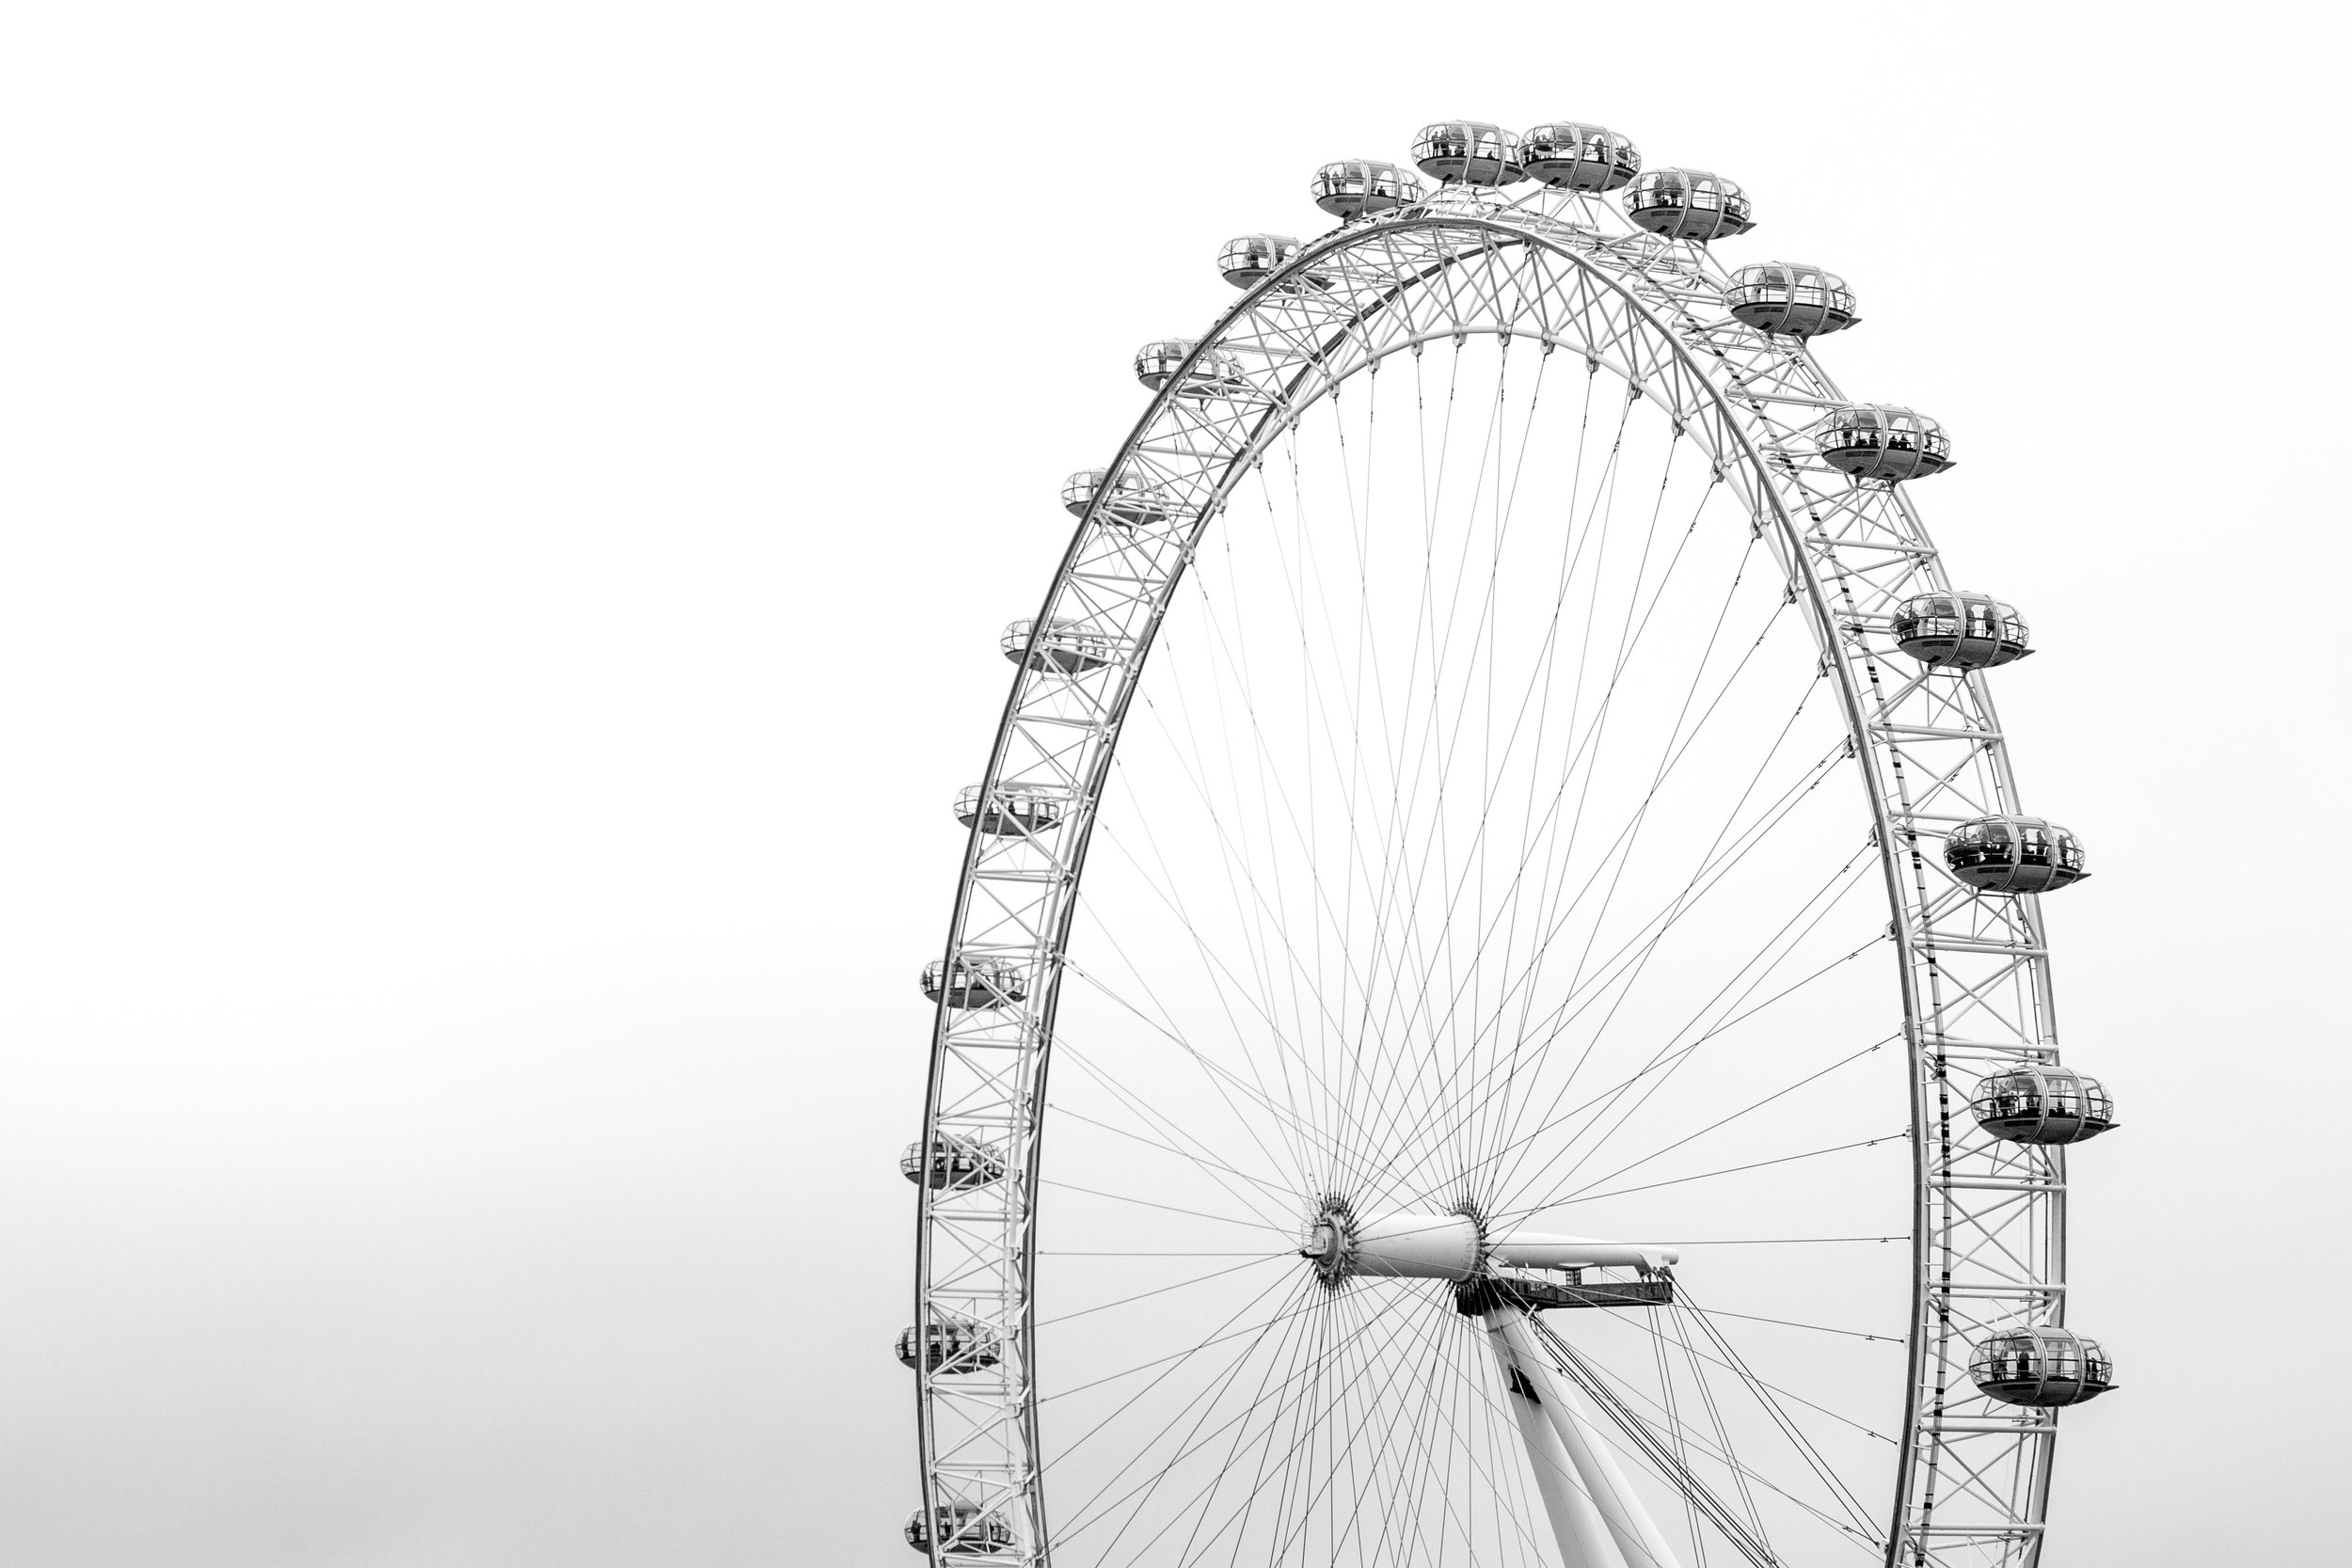 Visiting the London Eye: What You Need to Know